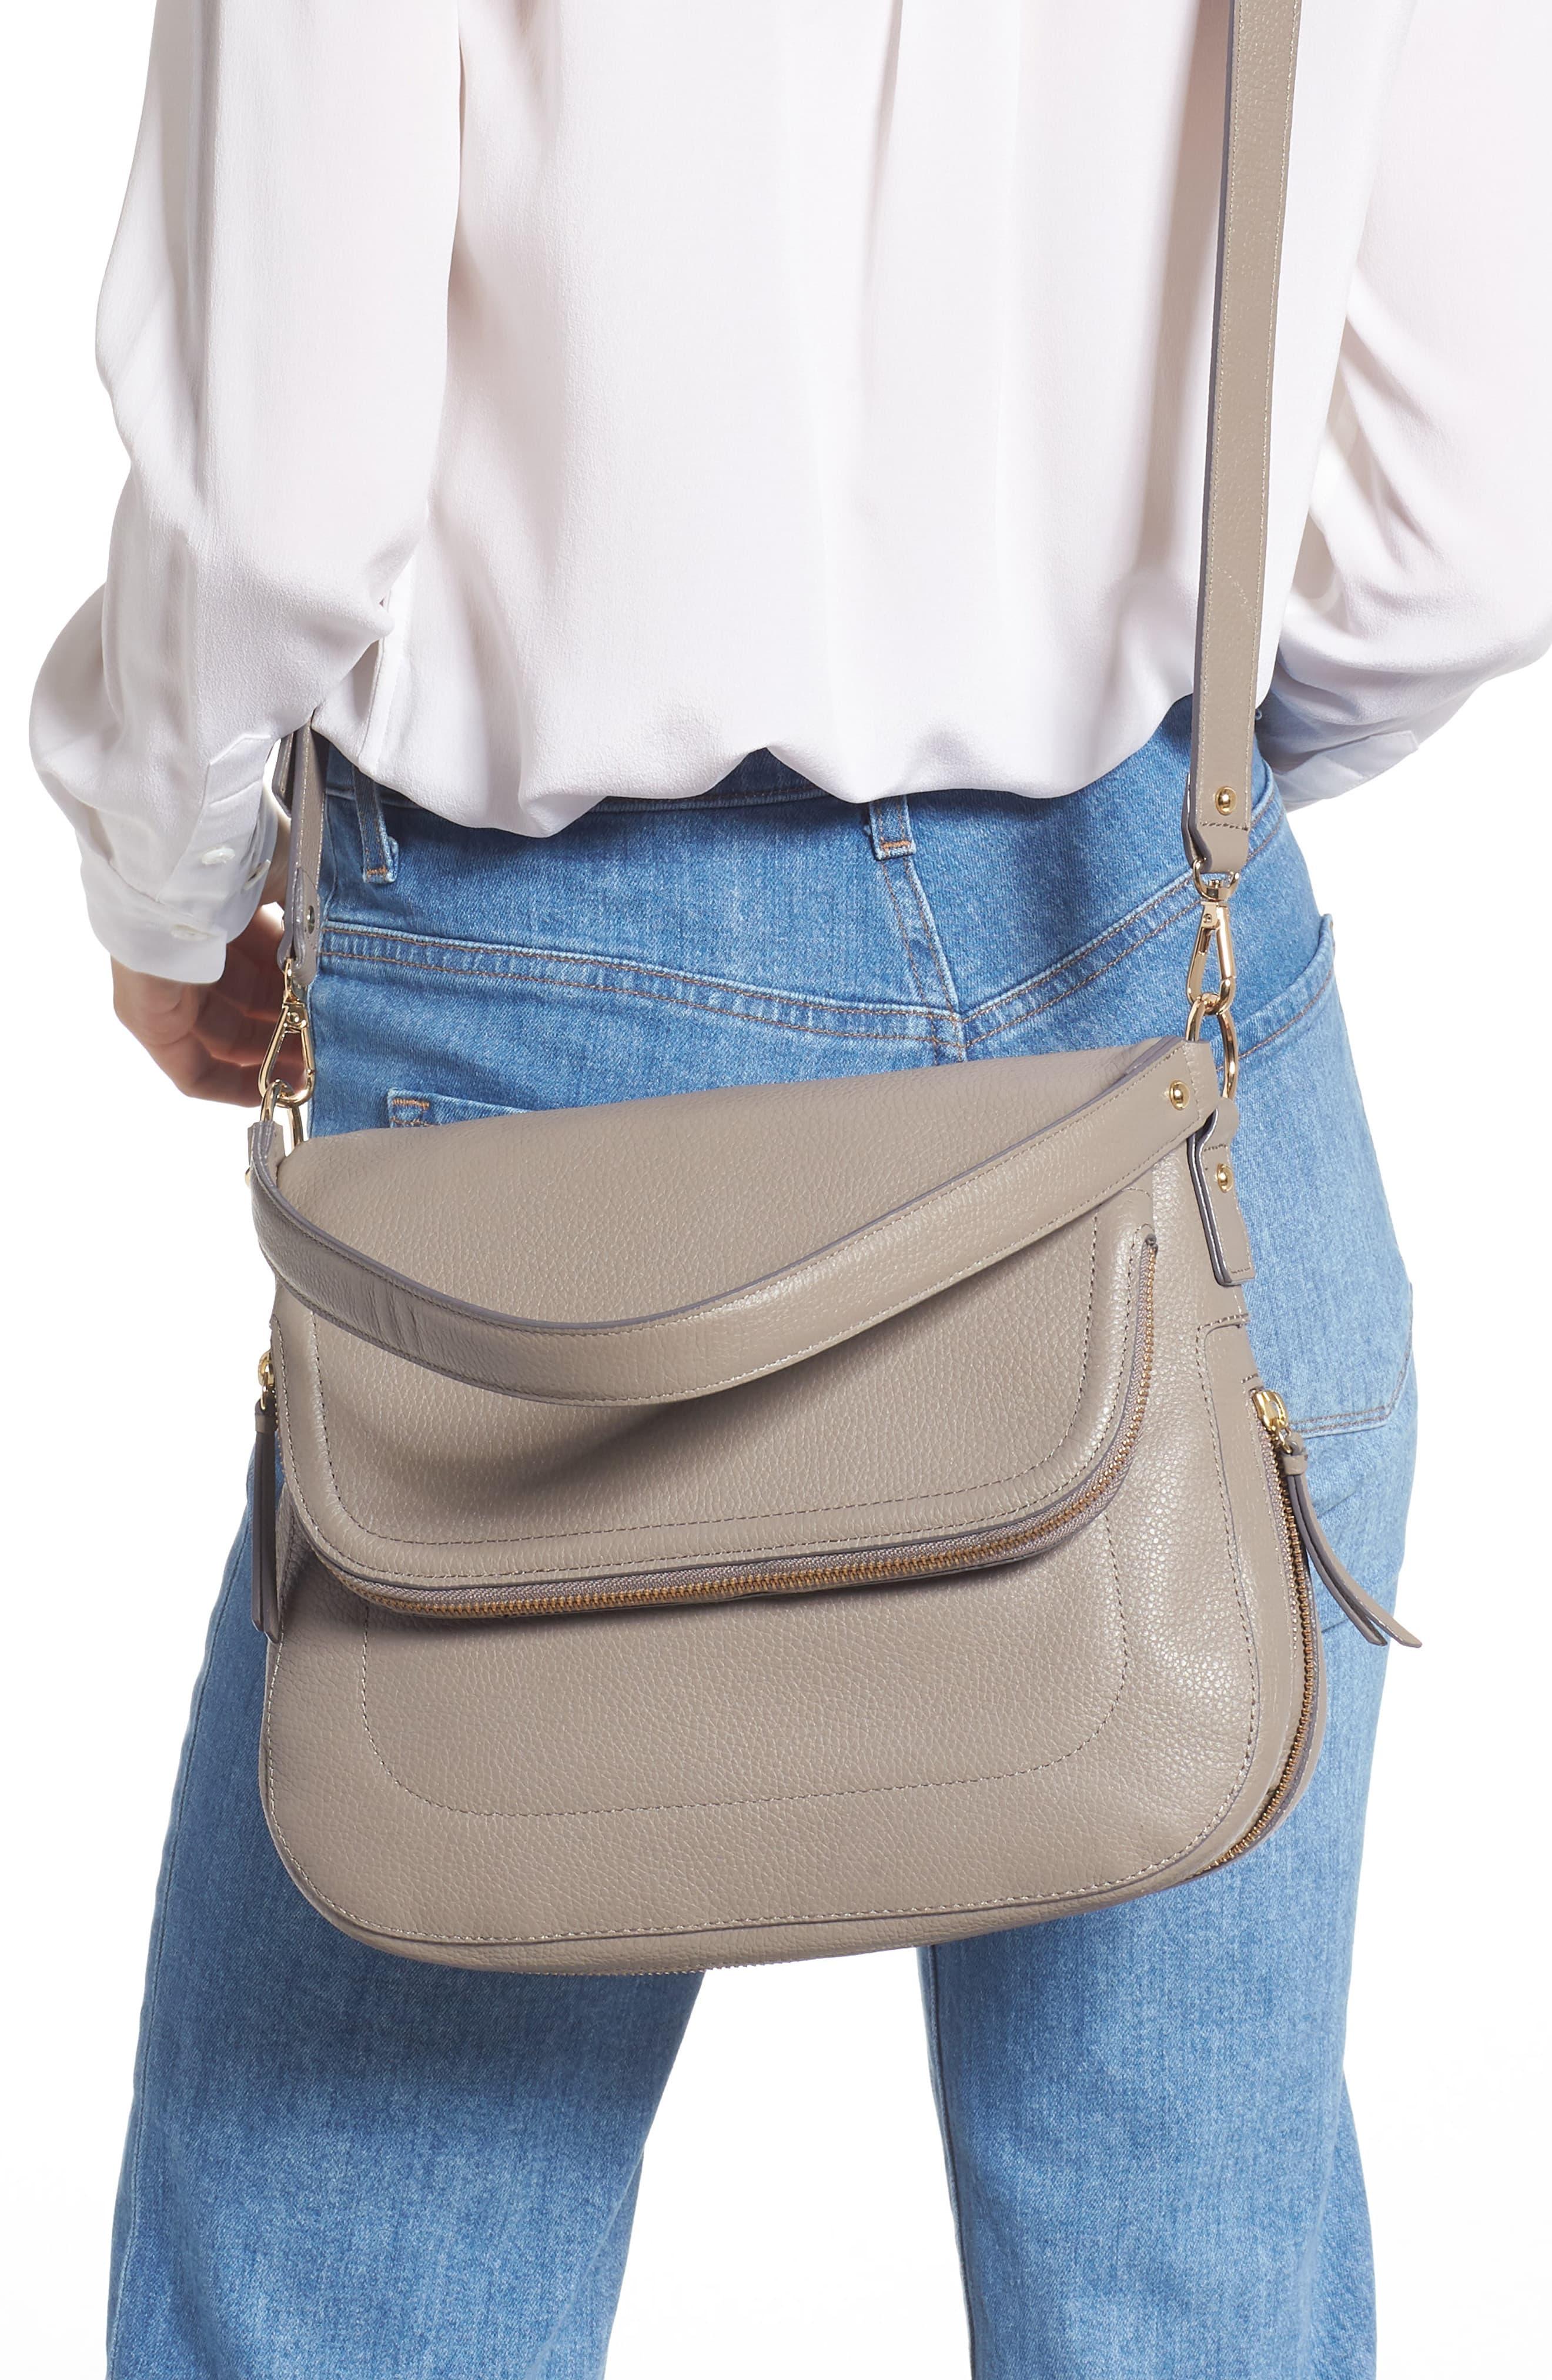 Nordstrom Bella Leather Crossbody Bag in Grey Taupe (Gray) - Lyst